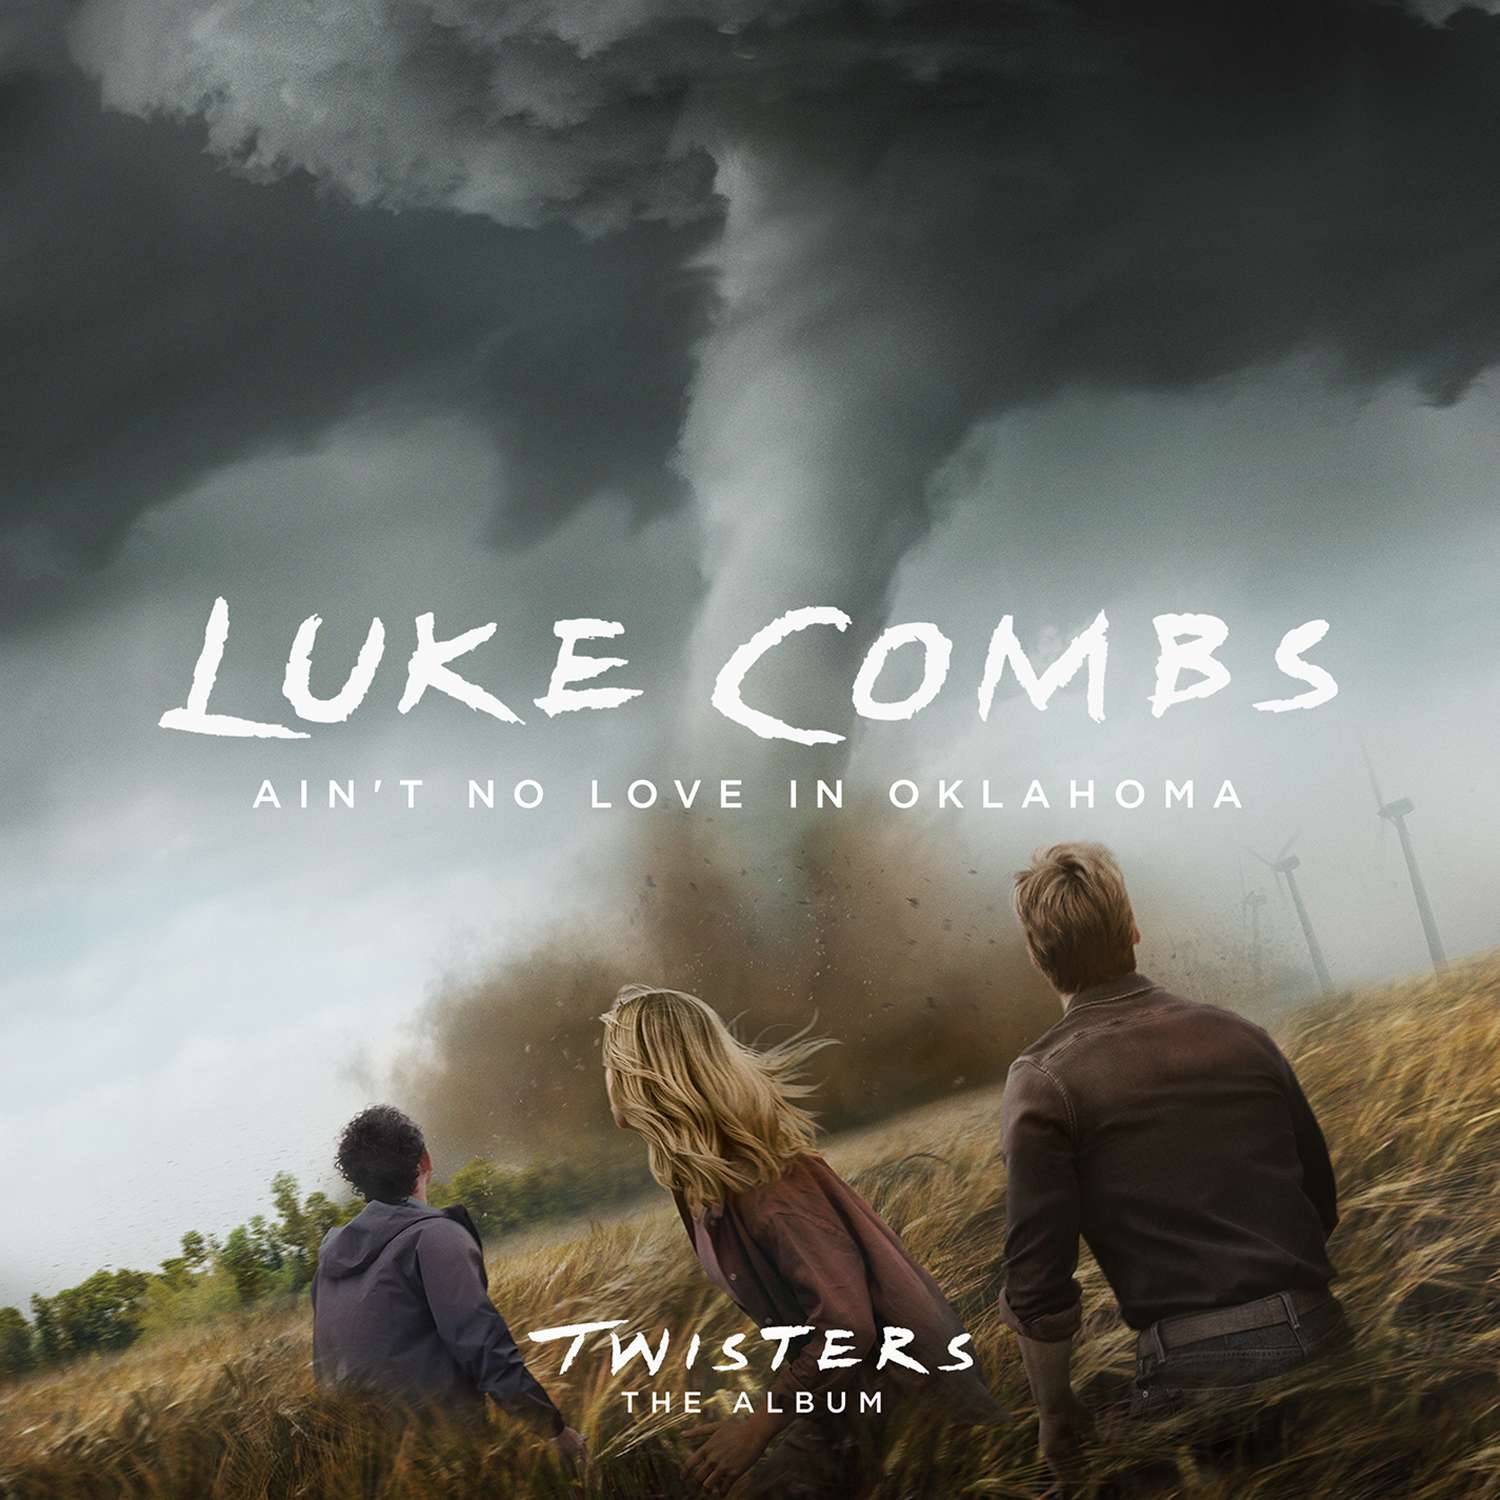 Luke Combs Drops 'Ain't No Love in Oklahoma' Featured on 'Twisters' Soundtrack — Watch the Thrilling Music Video